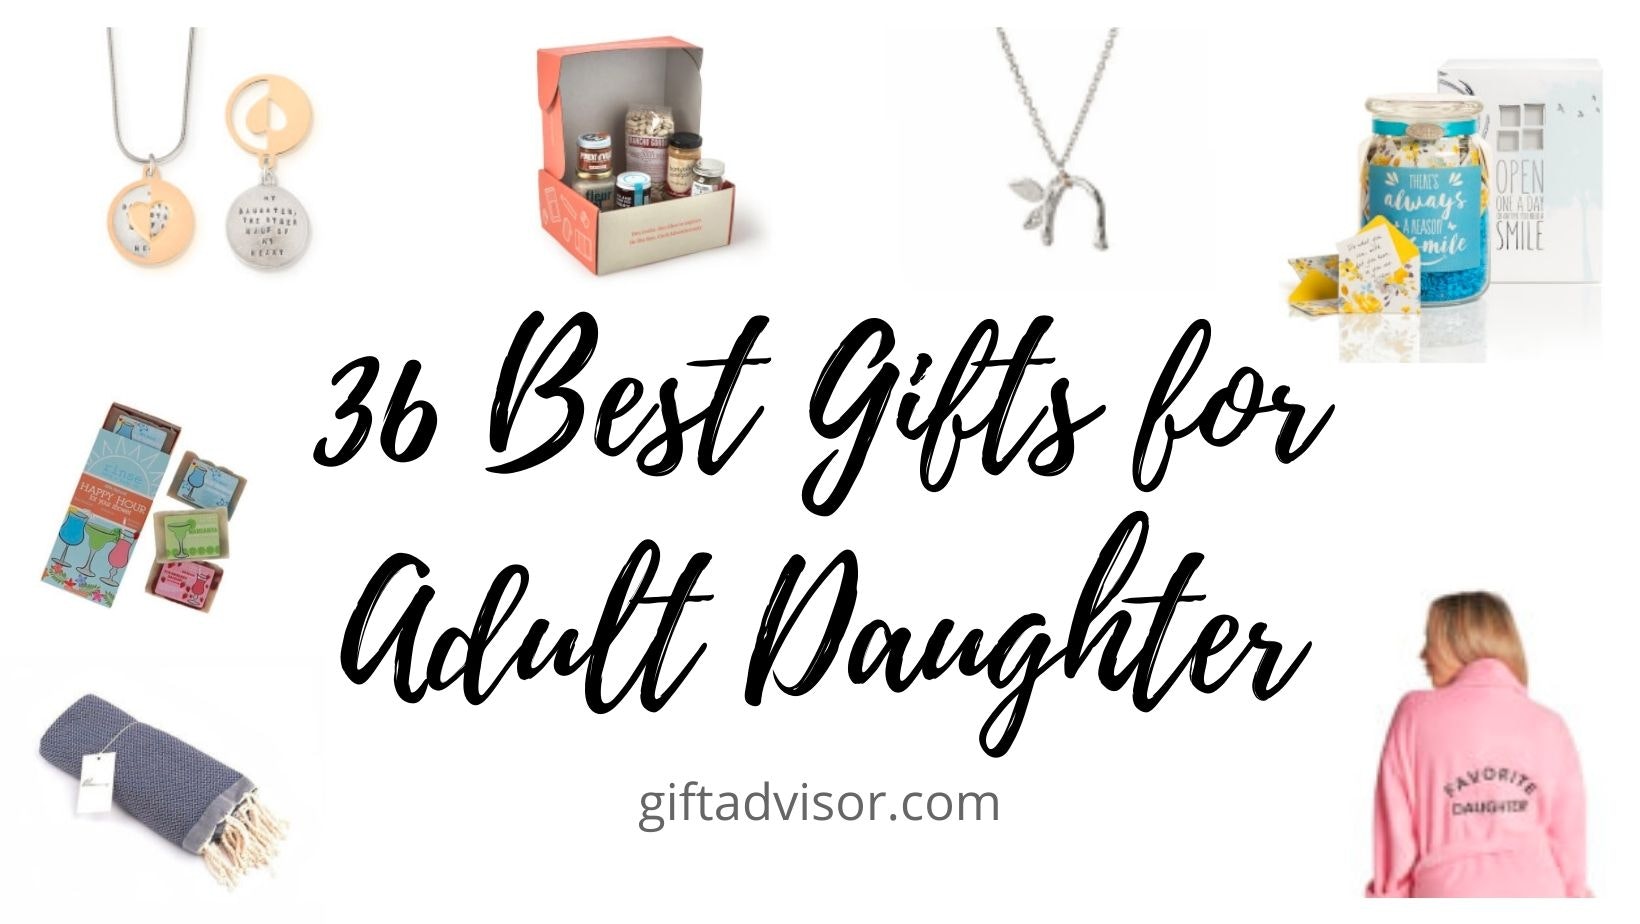 A Charmed Impression Daughter Gifts from Mom Dad • Gift for Adult